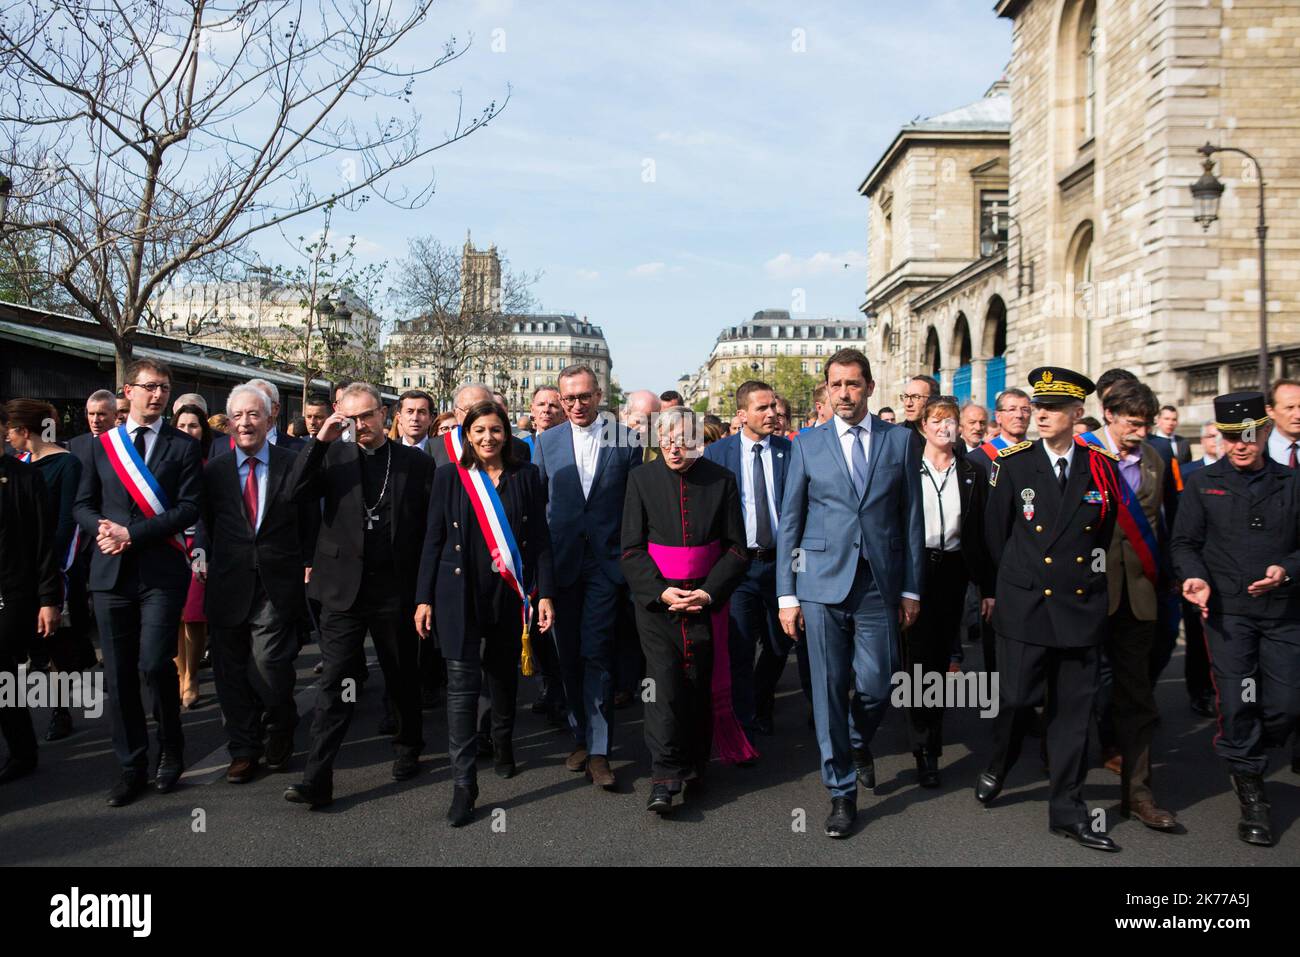 French Interior Minister Christophe Castaner (C), Notre Dame cathedral rector Jean-Marc Chauvet (2L), Paris mayor Anne Hidalgo (L), Paris prefect Didier Lallement (3R) and other officials walk to Notre Dame cathedral on April 18, 2019 in Paris. France paid a daylong tribute on April 18, 2019 to the Paris firefighters who saved Notre Dame Cathedral from collapse, while construction workers rushed to secure an area above one of the church's famed rose-shaped windows and other vulnerable sections of the fire-damaged landmark  Stock Photo